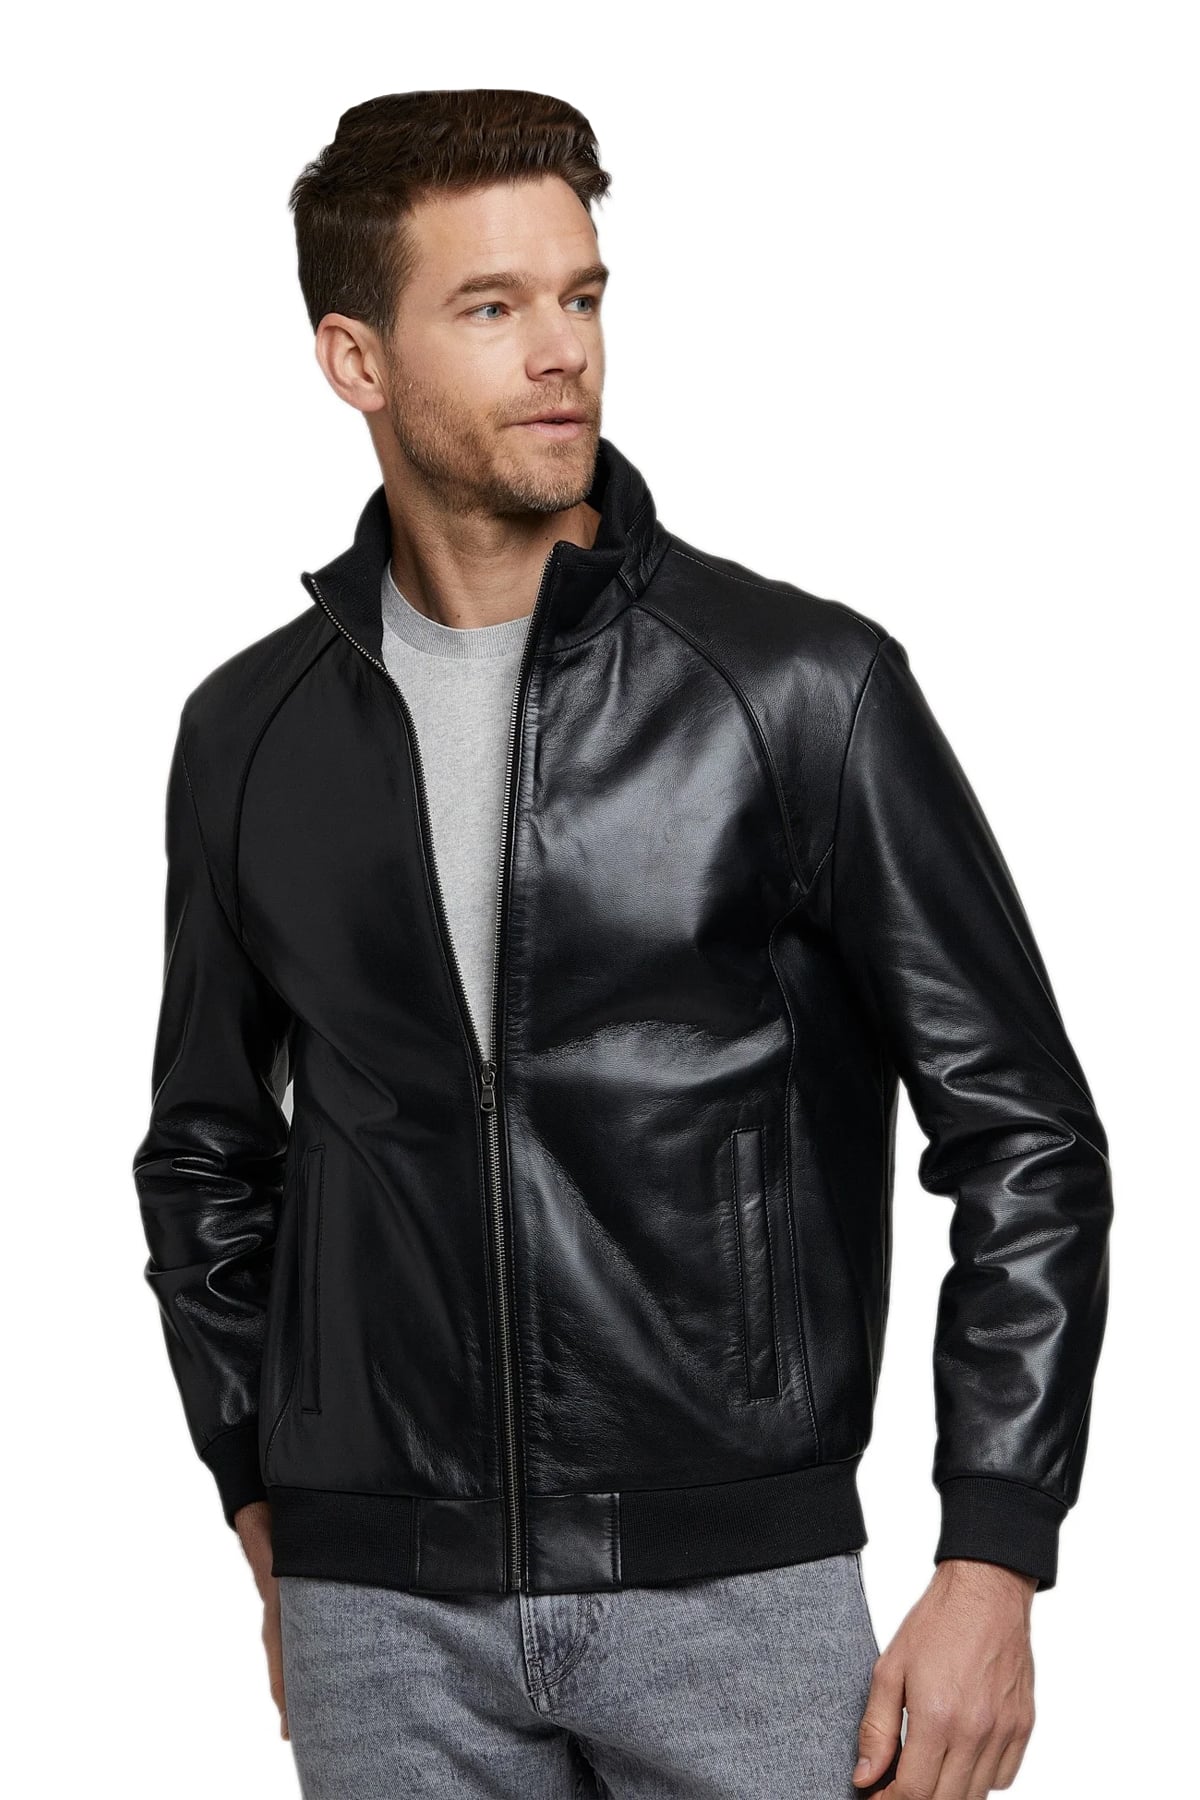 Sean O'Pry Men's 100 % Real Black Leather Shinny Jacket